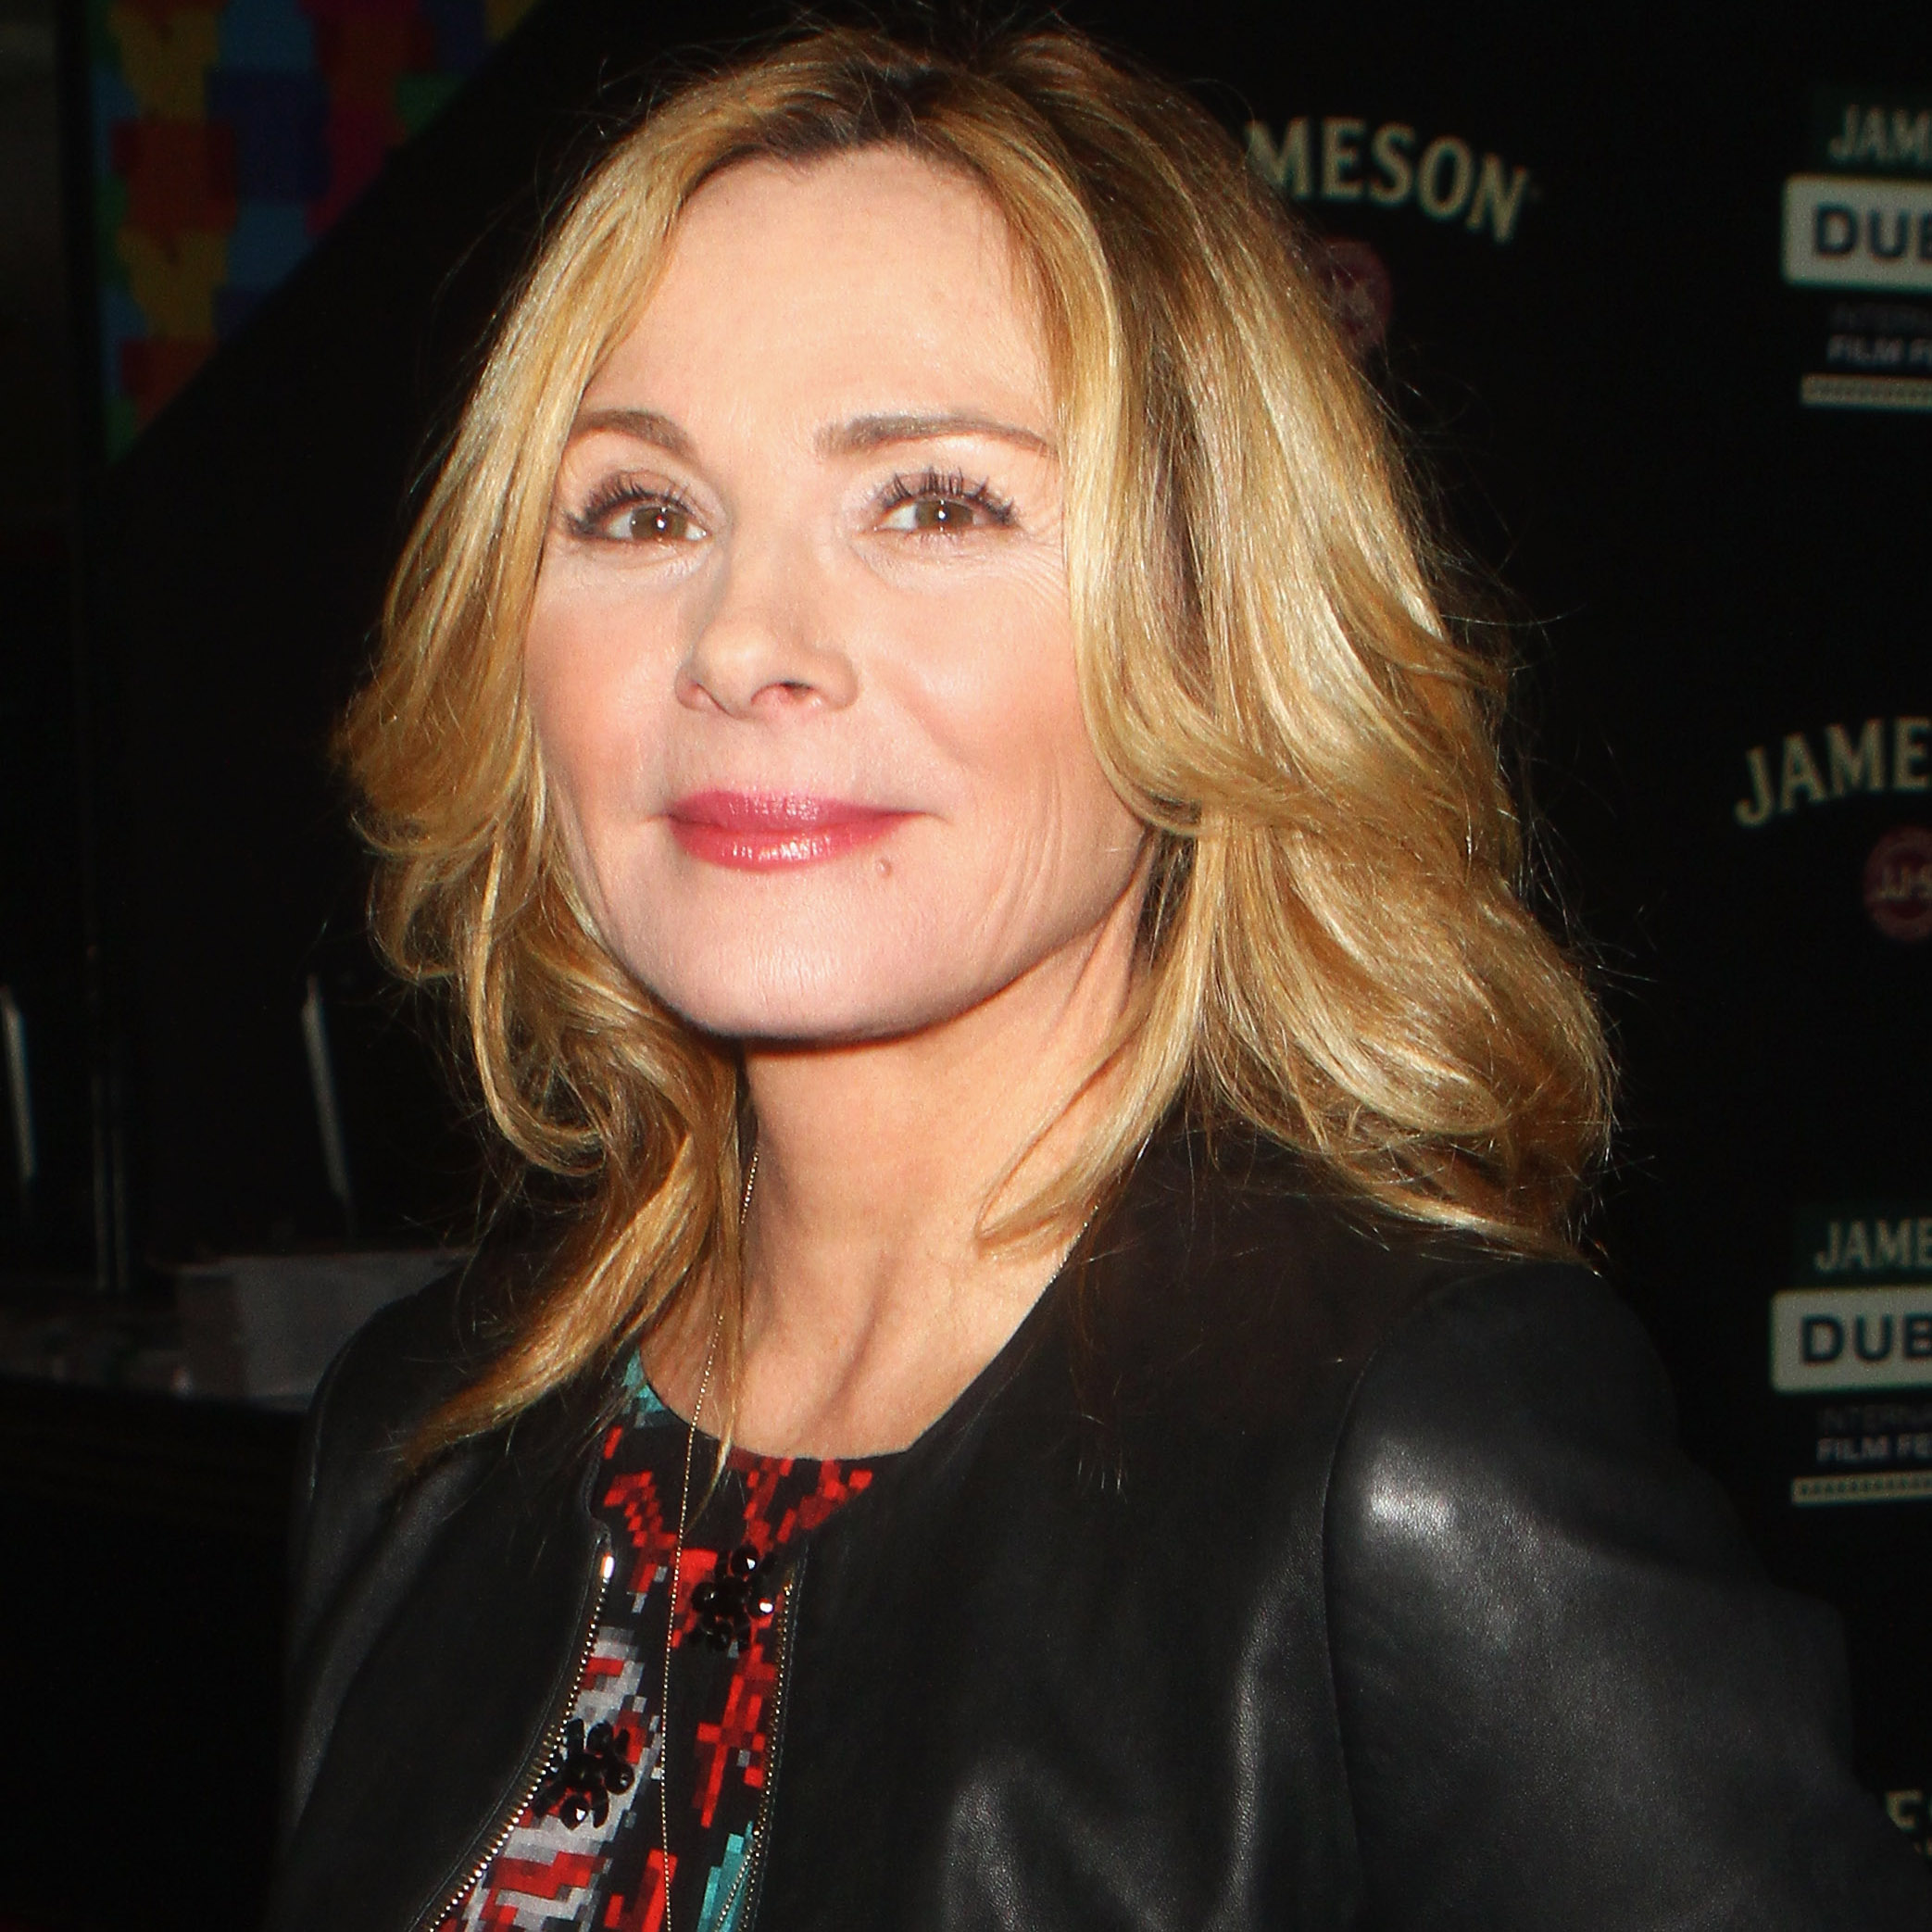 Sex And The City Star Kim Cattrall Shaken Up After Car Crashes Into Front Of Her House 4690